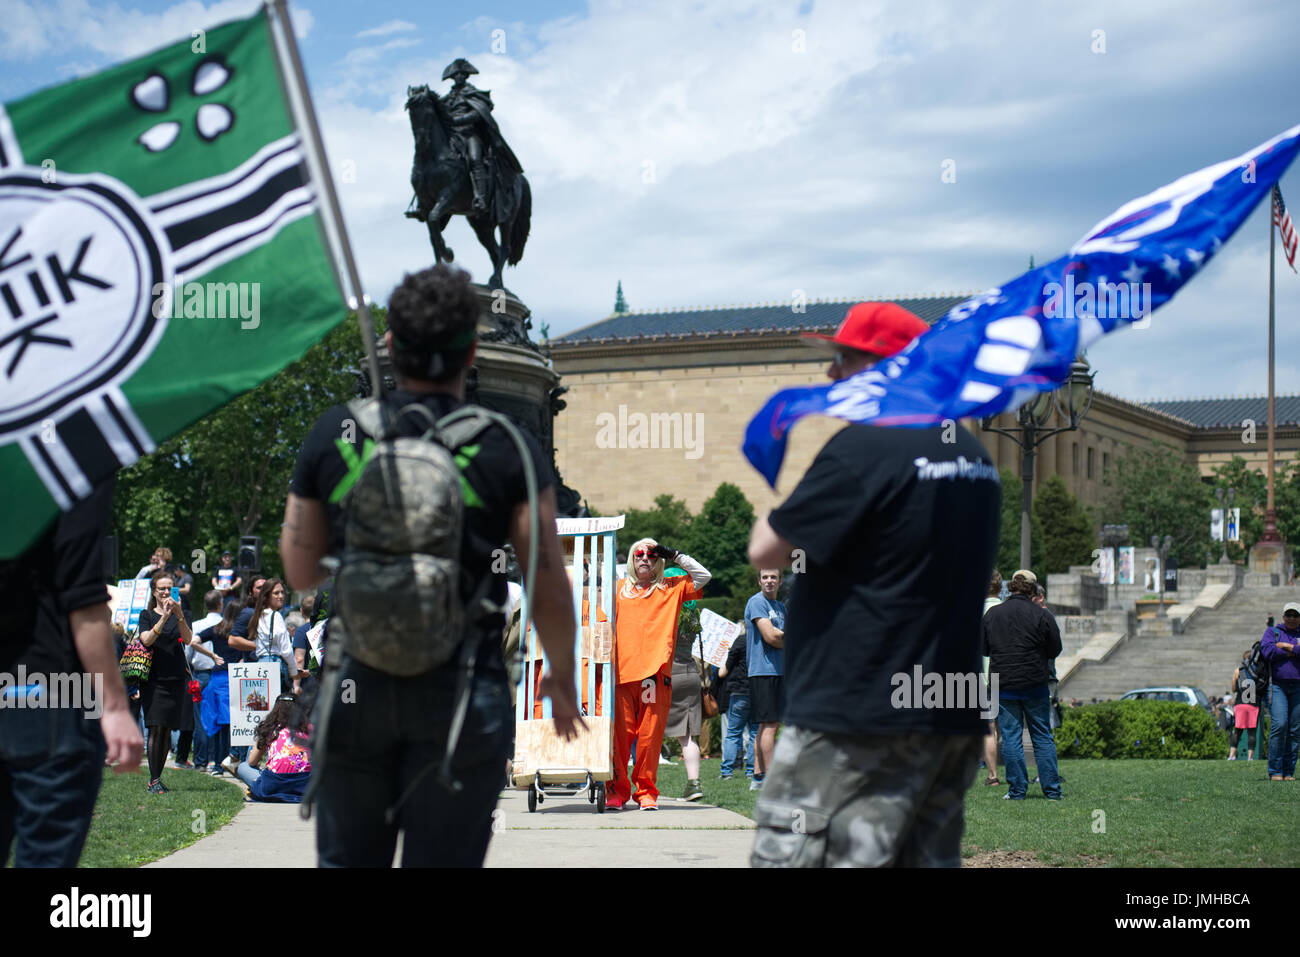 Trump supporter carries a Kekistan flag while confronting  March for Truth anti-Trump protestors in Philadelphia, PA, on June 3, 2017. Stock Photo